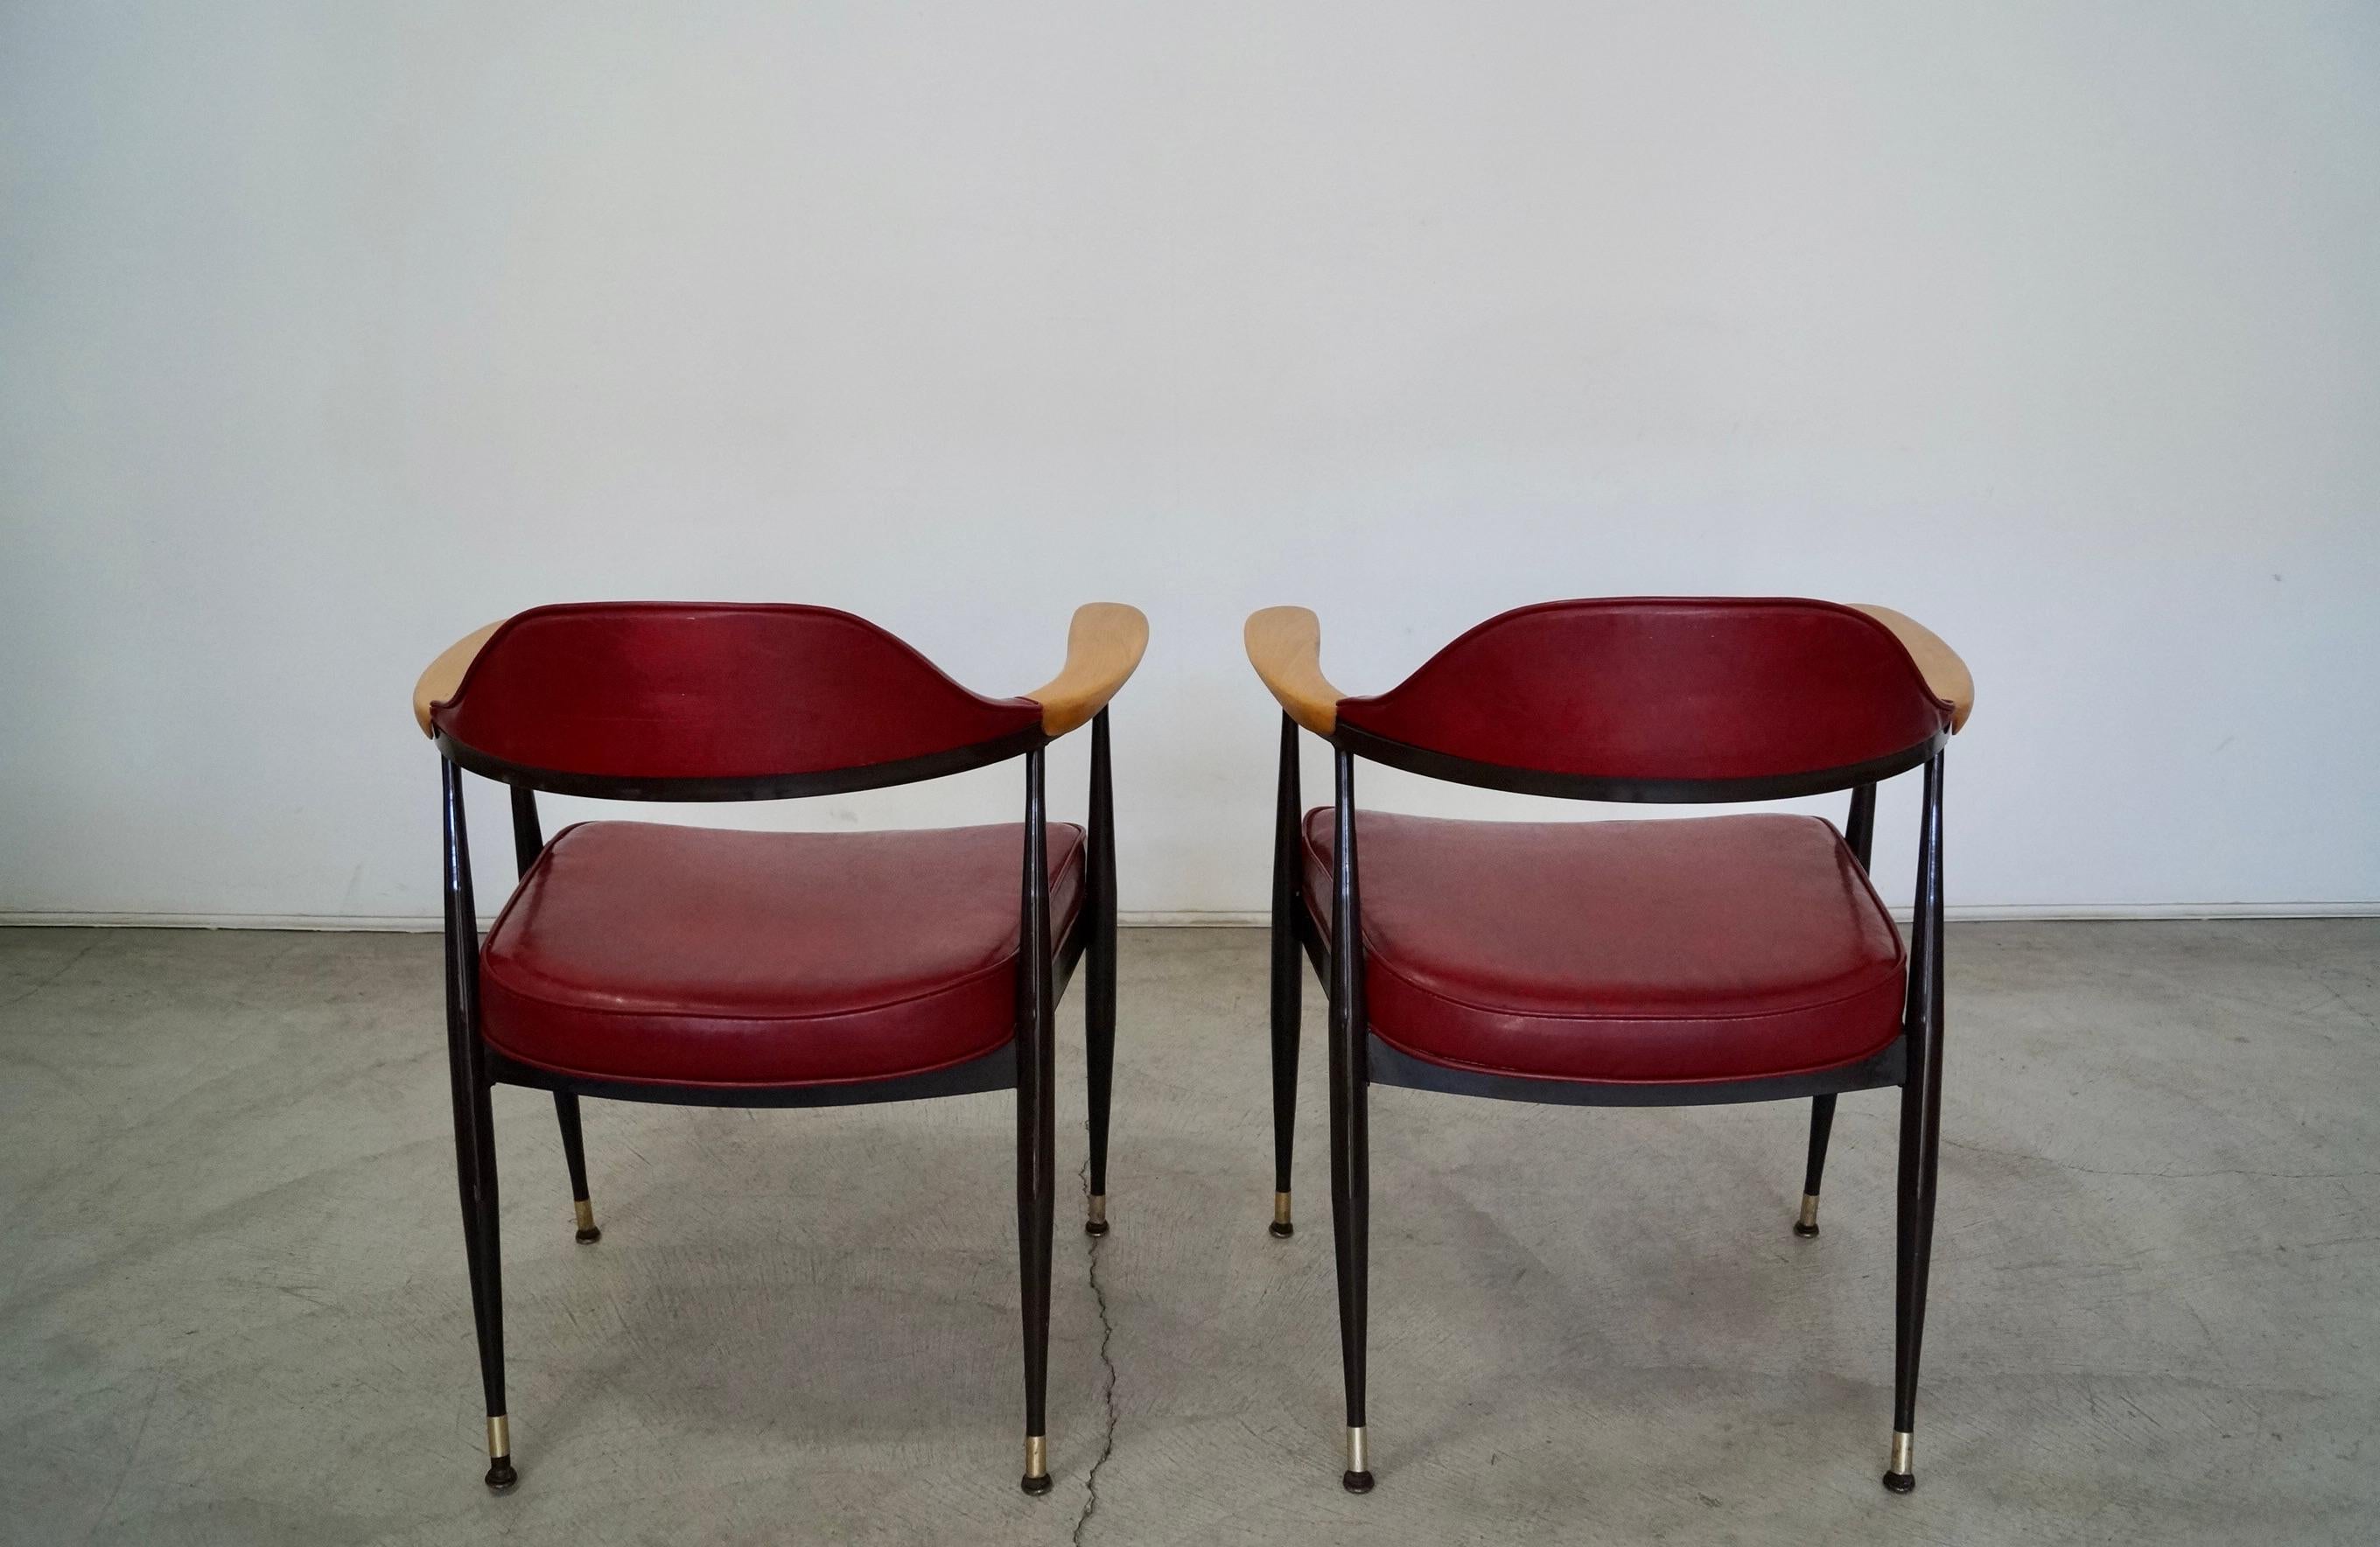 1970's Mid-Century Modern Metal & Wood Armchairs - a Pair For Sale 1